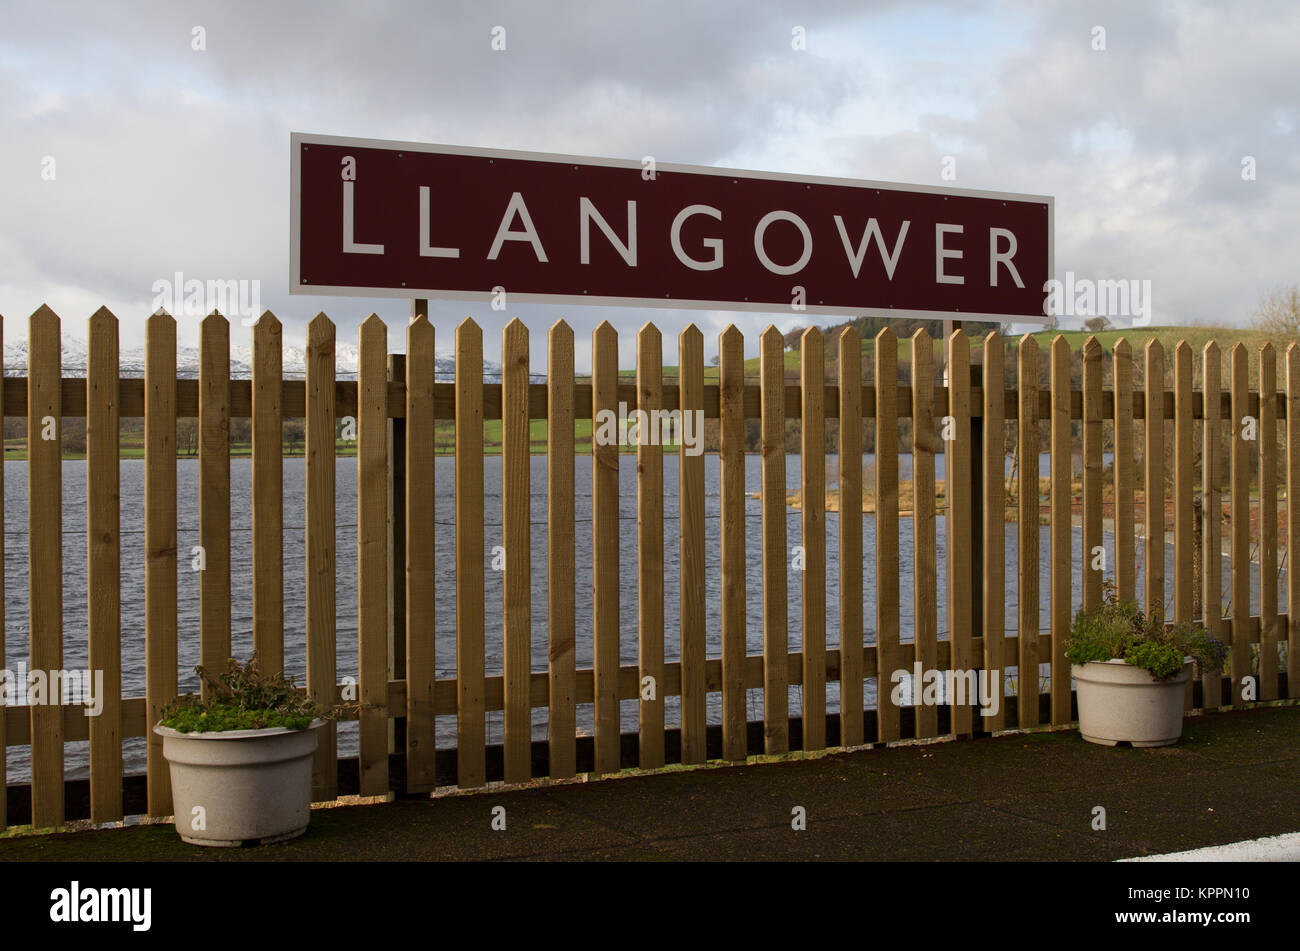 Llangower Railway Station, Bala Lake Railway with station name board, Lake and Mountains behind, Winter planting in pots Stock Photo